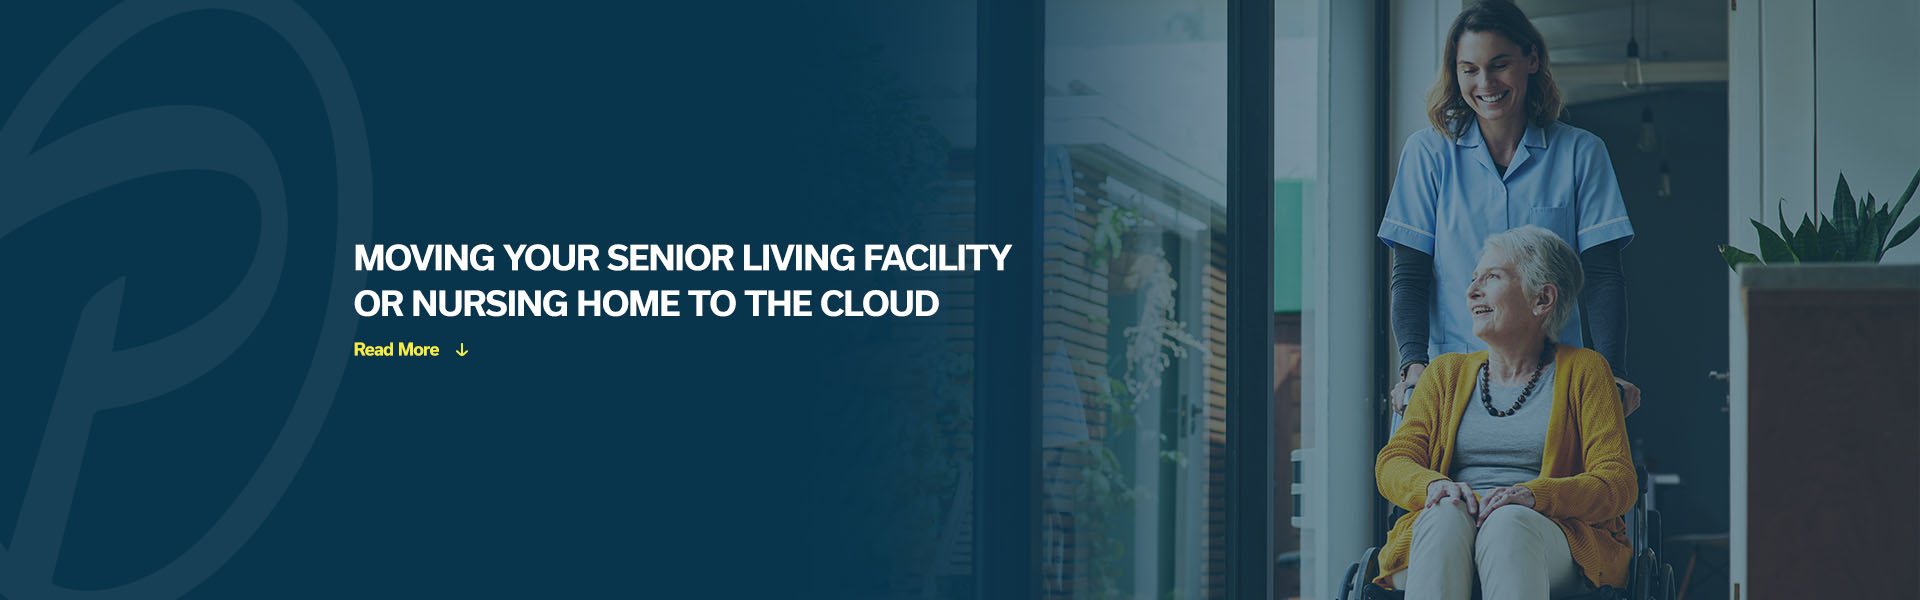 01-moving-your-senior-living-facility-or-nursing-home-to-the-cloud